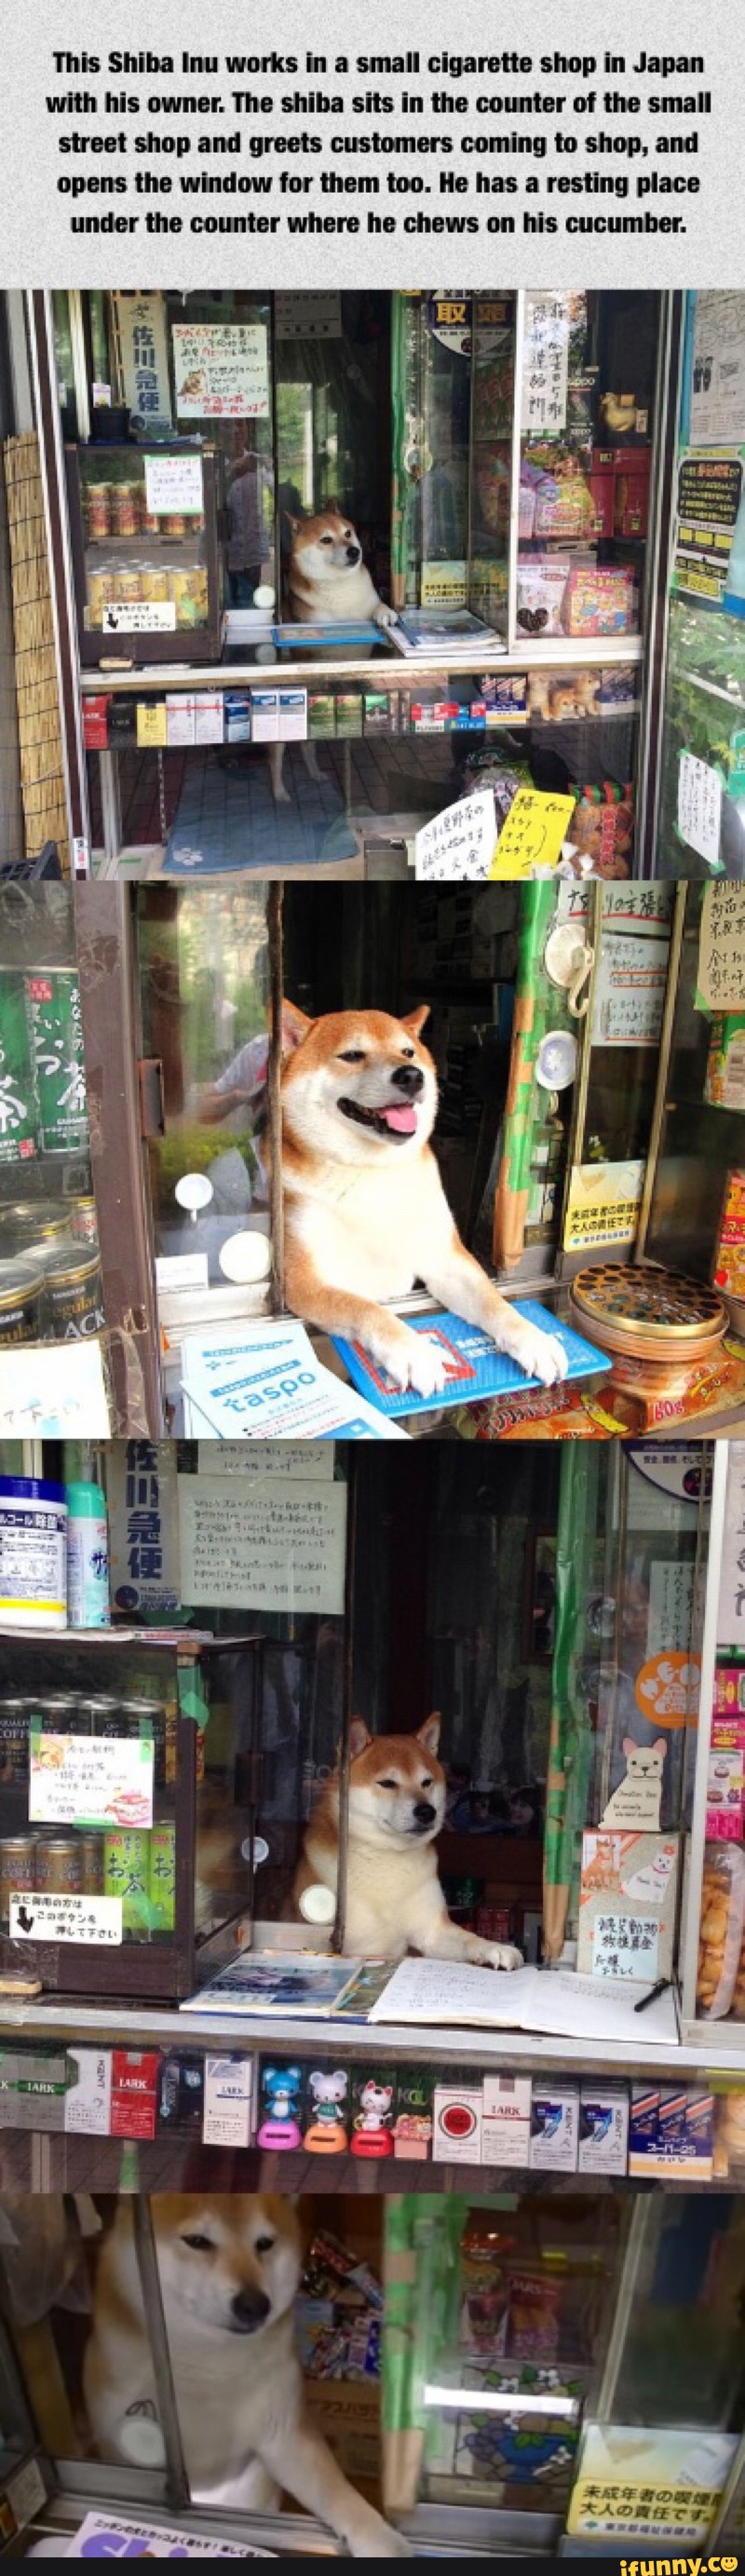 Ibis Shiba Inu Works Ii A Small Cigarette Shop In Japan With